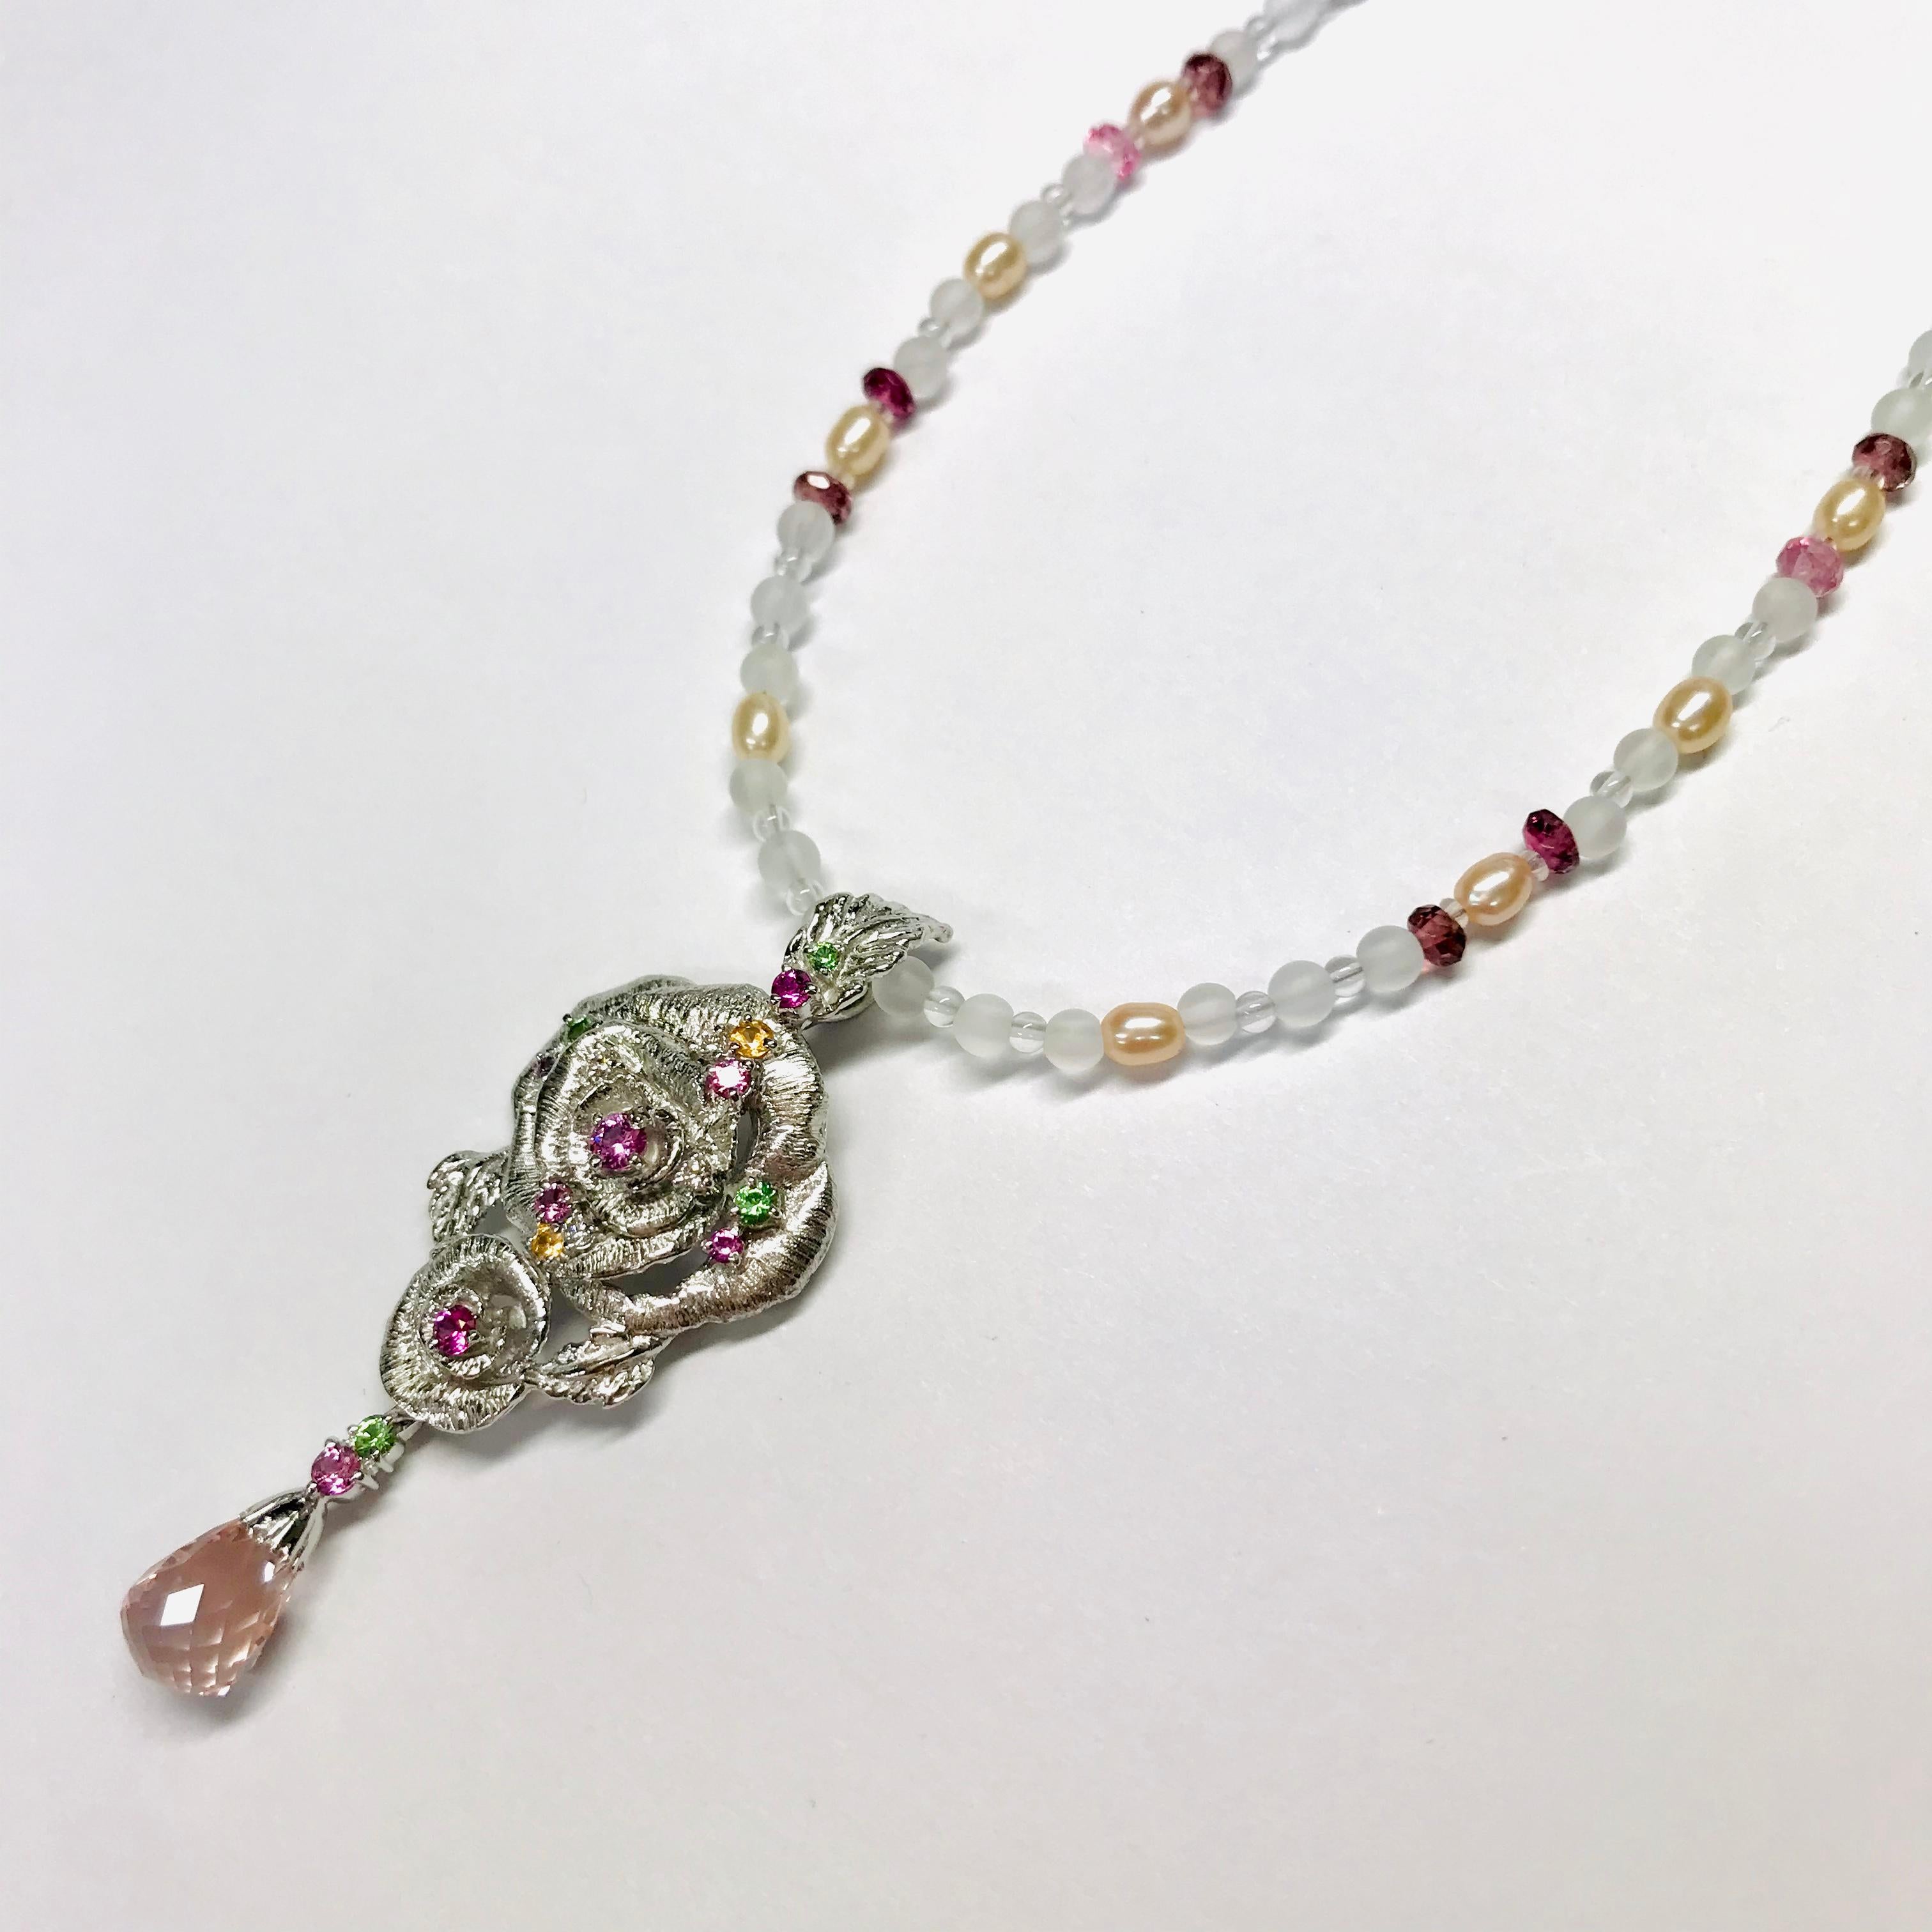 The list price includes the Japanese Sales Tax.
All buyers outside of Japan will receive -10% tax exemption from the list price. 
Please inquire for details.

[Product Details]
Pendant : K18WG
MORGANITE 2.65ct / PINK SAPPHIRE 0.36ct 
GARNET(GREEN &